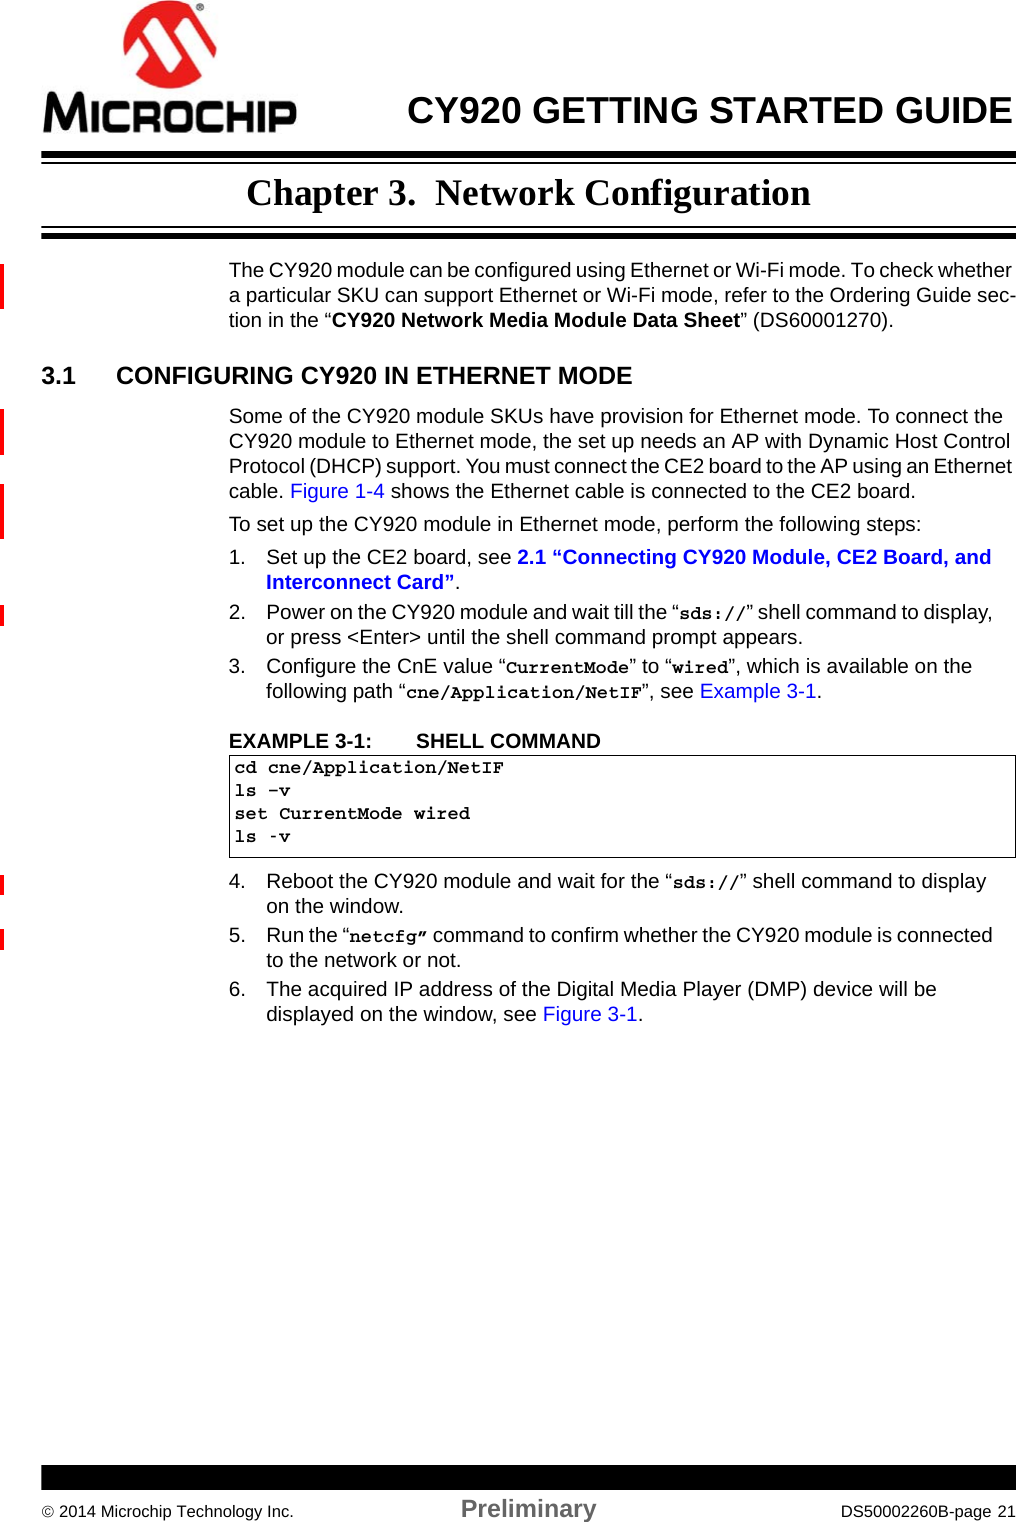  CY920 GETTING STARTED GUIDE 2014 Microchip Technology Inc. Preliminary DS50002260B-page 21Chapter 3.  Network ConfigurationThe CY920 module can be configured using Ethernet or Wi-Fi mode. To check whether a particular SKU can support Ethernet or Wi-Fi mode, refer to the Ordering Guide sec-tion in the “CY920 Network Media Module Data Sheet” (DS60001270). 3.1 CONFIGURING CY920 IN ETHERNET MODESome of the CY920 module SKUs have provision for Ethernet mode. To connect the CY920 module to Ethernet mode, the set up needs an AP with Dynamic Host Control Protocol (DHCP) support. You must connect the CE2 board to the AP using an Ethernet cable. Figure 1-4 shows the Ethernet cable is connected to the CE2 board.To set up the CY920 module in Ethernet mode, perform the following steps:1. Set up the CE2 board, see 2.1 “Connecting CY920 Module, CE2 Board, and Interconnect Card”.2. Power on the CY920 module and wait till the “sds://” shell command to display, or press &lt;Enter&gt; until the shell command prompt appears.3. Configure the CnE value “CurrentMode” to “wired”, which is available on the following path “cne/Application/NetIF”, see Example 3-1.EXAMPLE 3-1:  SHELL COMMAND4. Reboot the CY920 module and wait for the “sds://” shell command to display on the window. 5. Run the “netcfg” command to confirm whether the CY920 module is connected to the network or not.6. The acquired IP address of the Digital Media Player (DMP) device will be displayed on the window, see Figure 3-1.cd cne/Application/NetIFls –vset CurrentMode wiredls -v